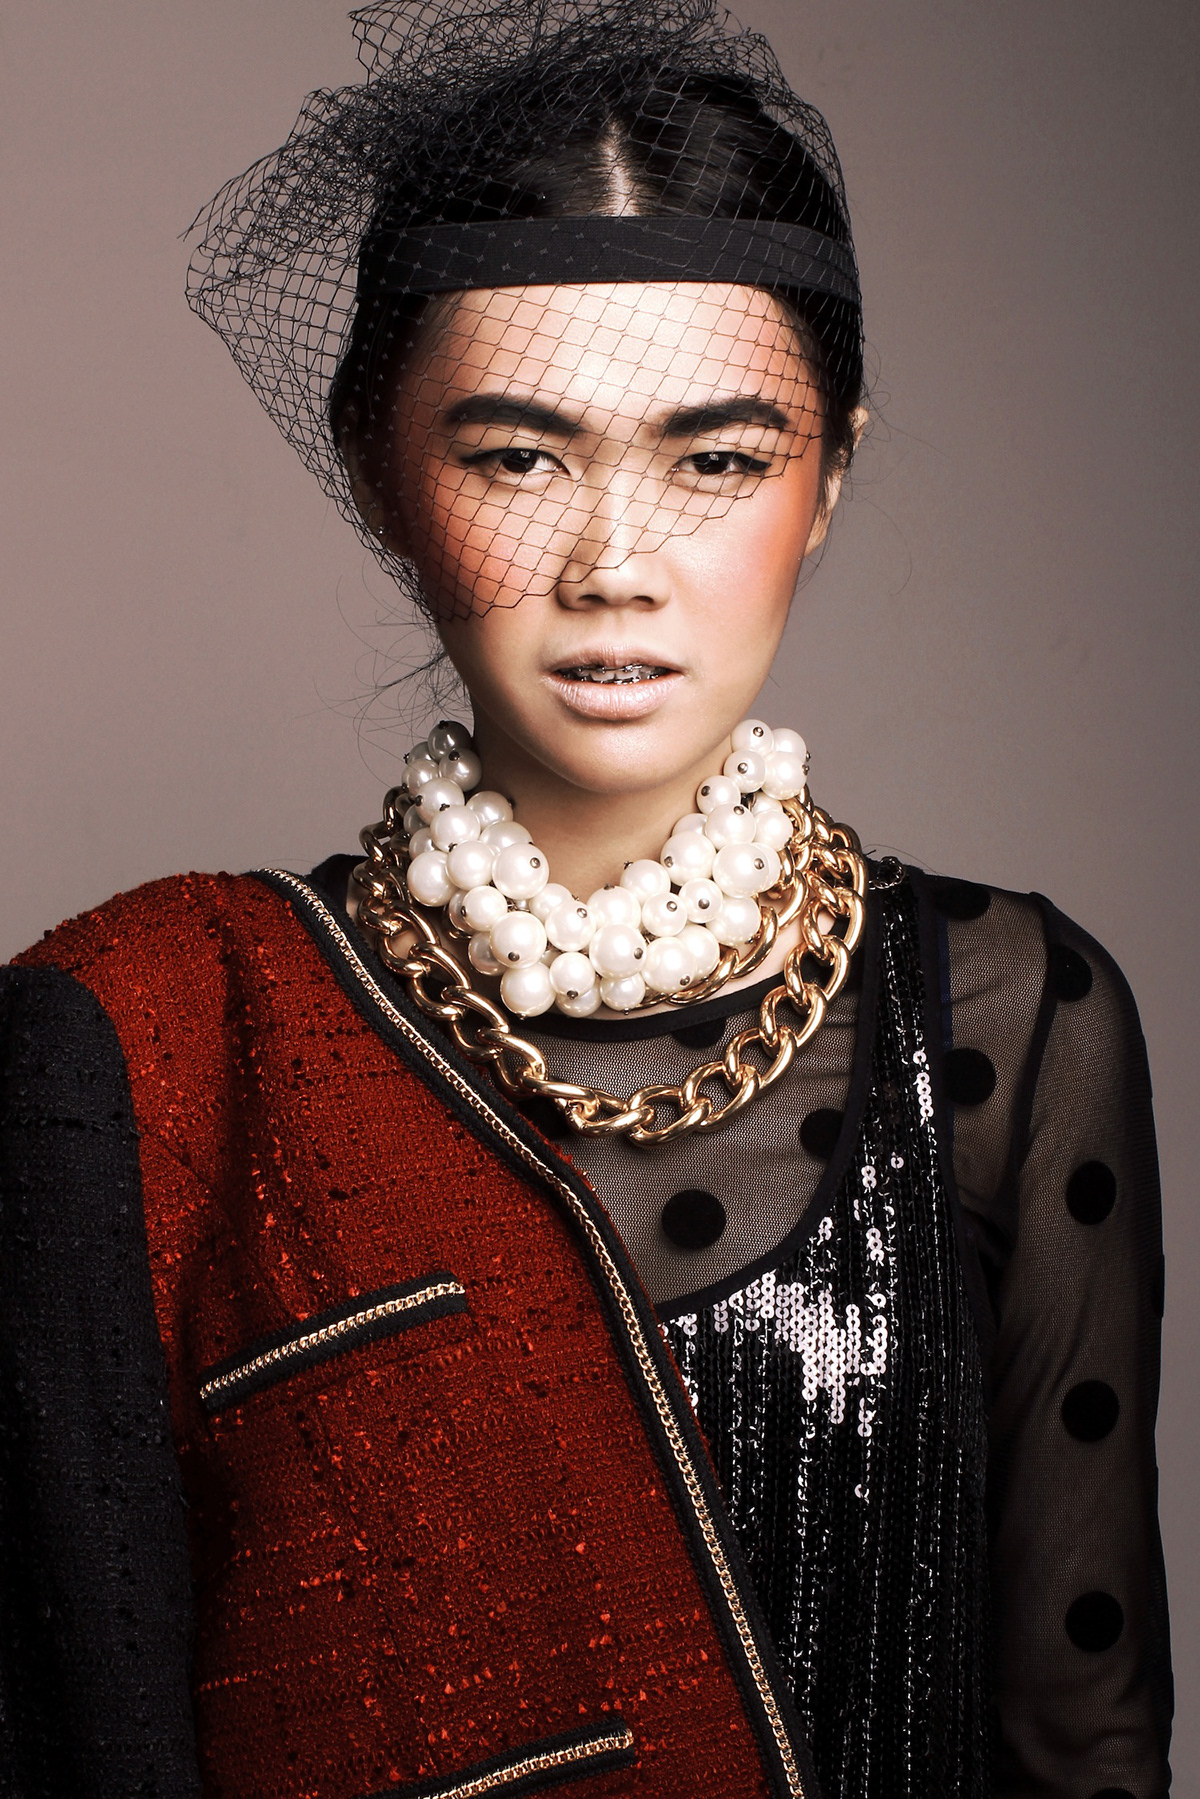 lasalle college beauty twenty stylist photo vogue indonesia asia south east